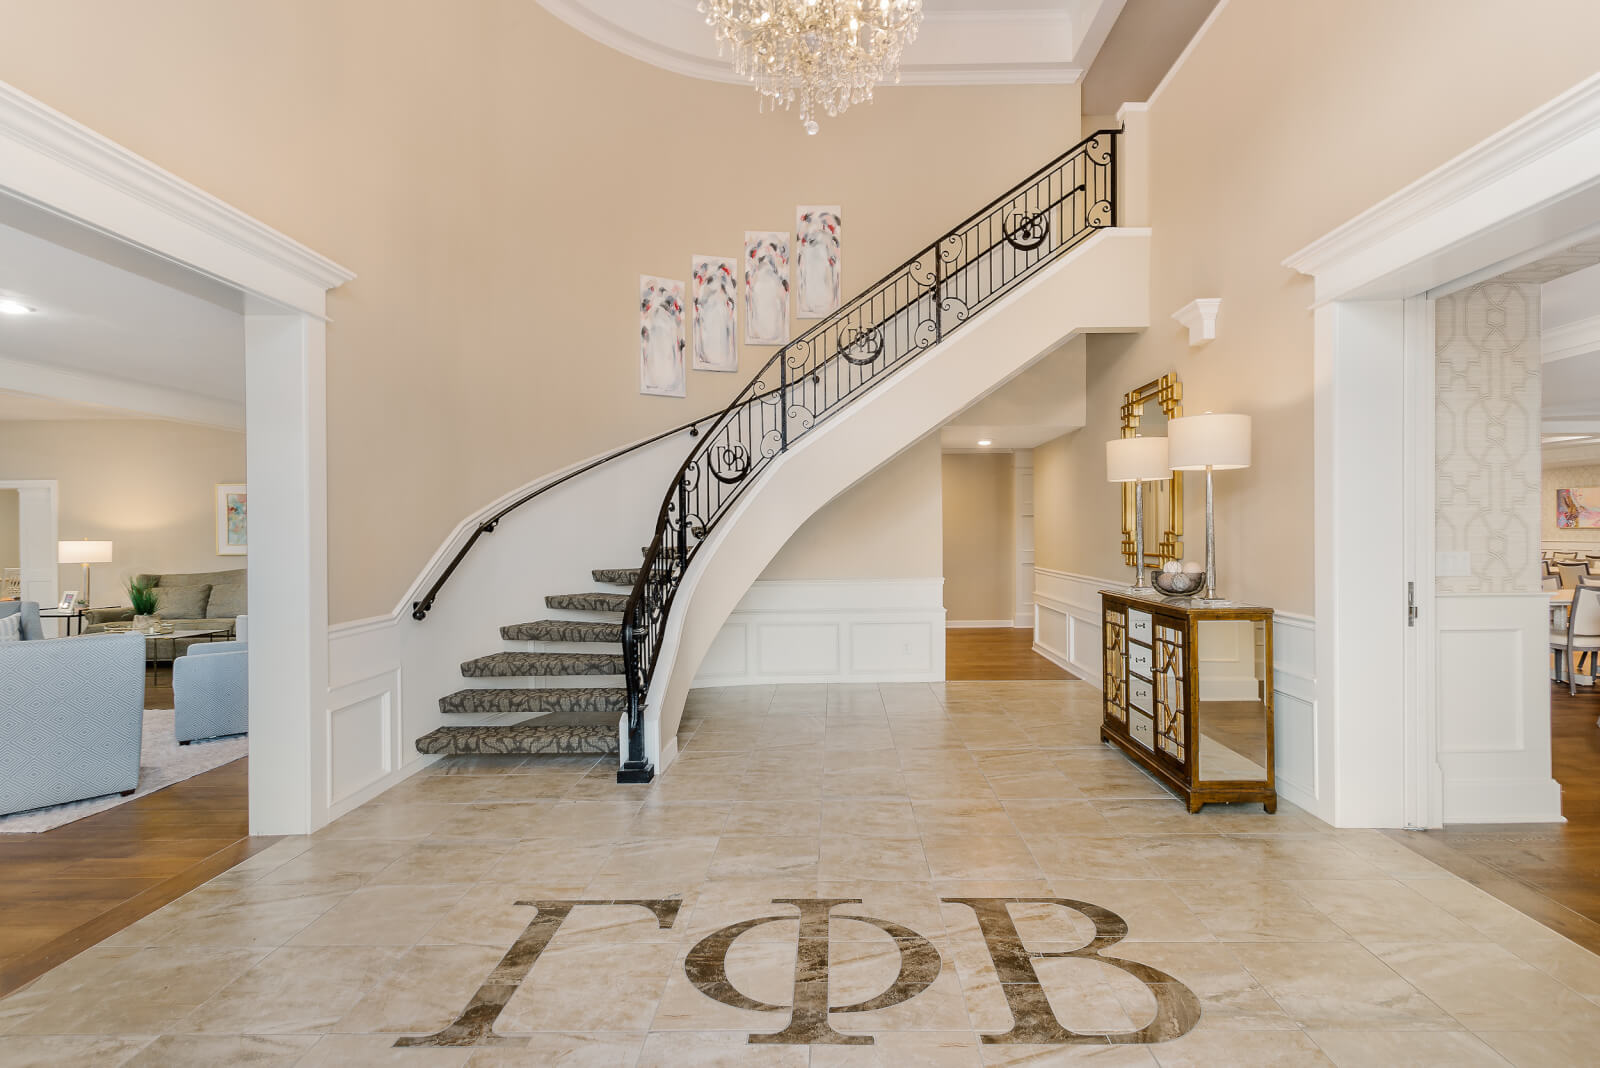 An Inside Look at Sorority Houses Around the South With PDR Interiors